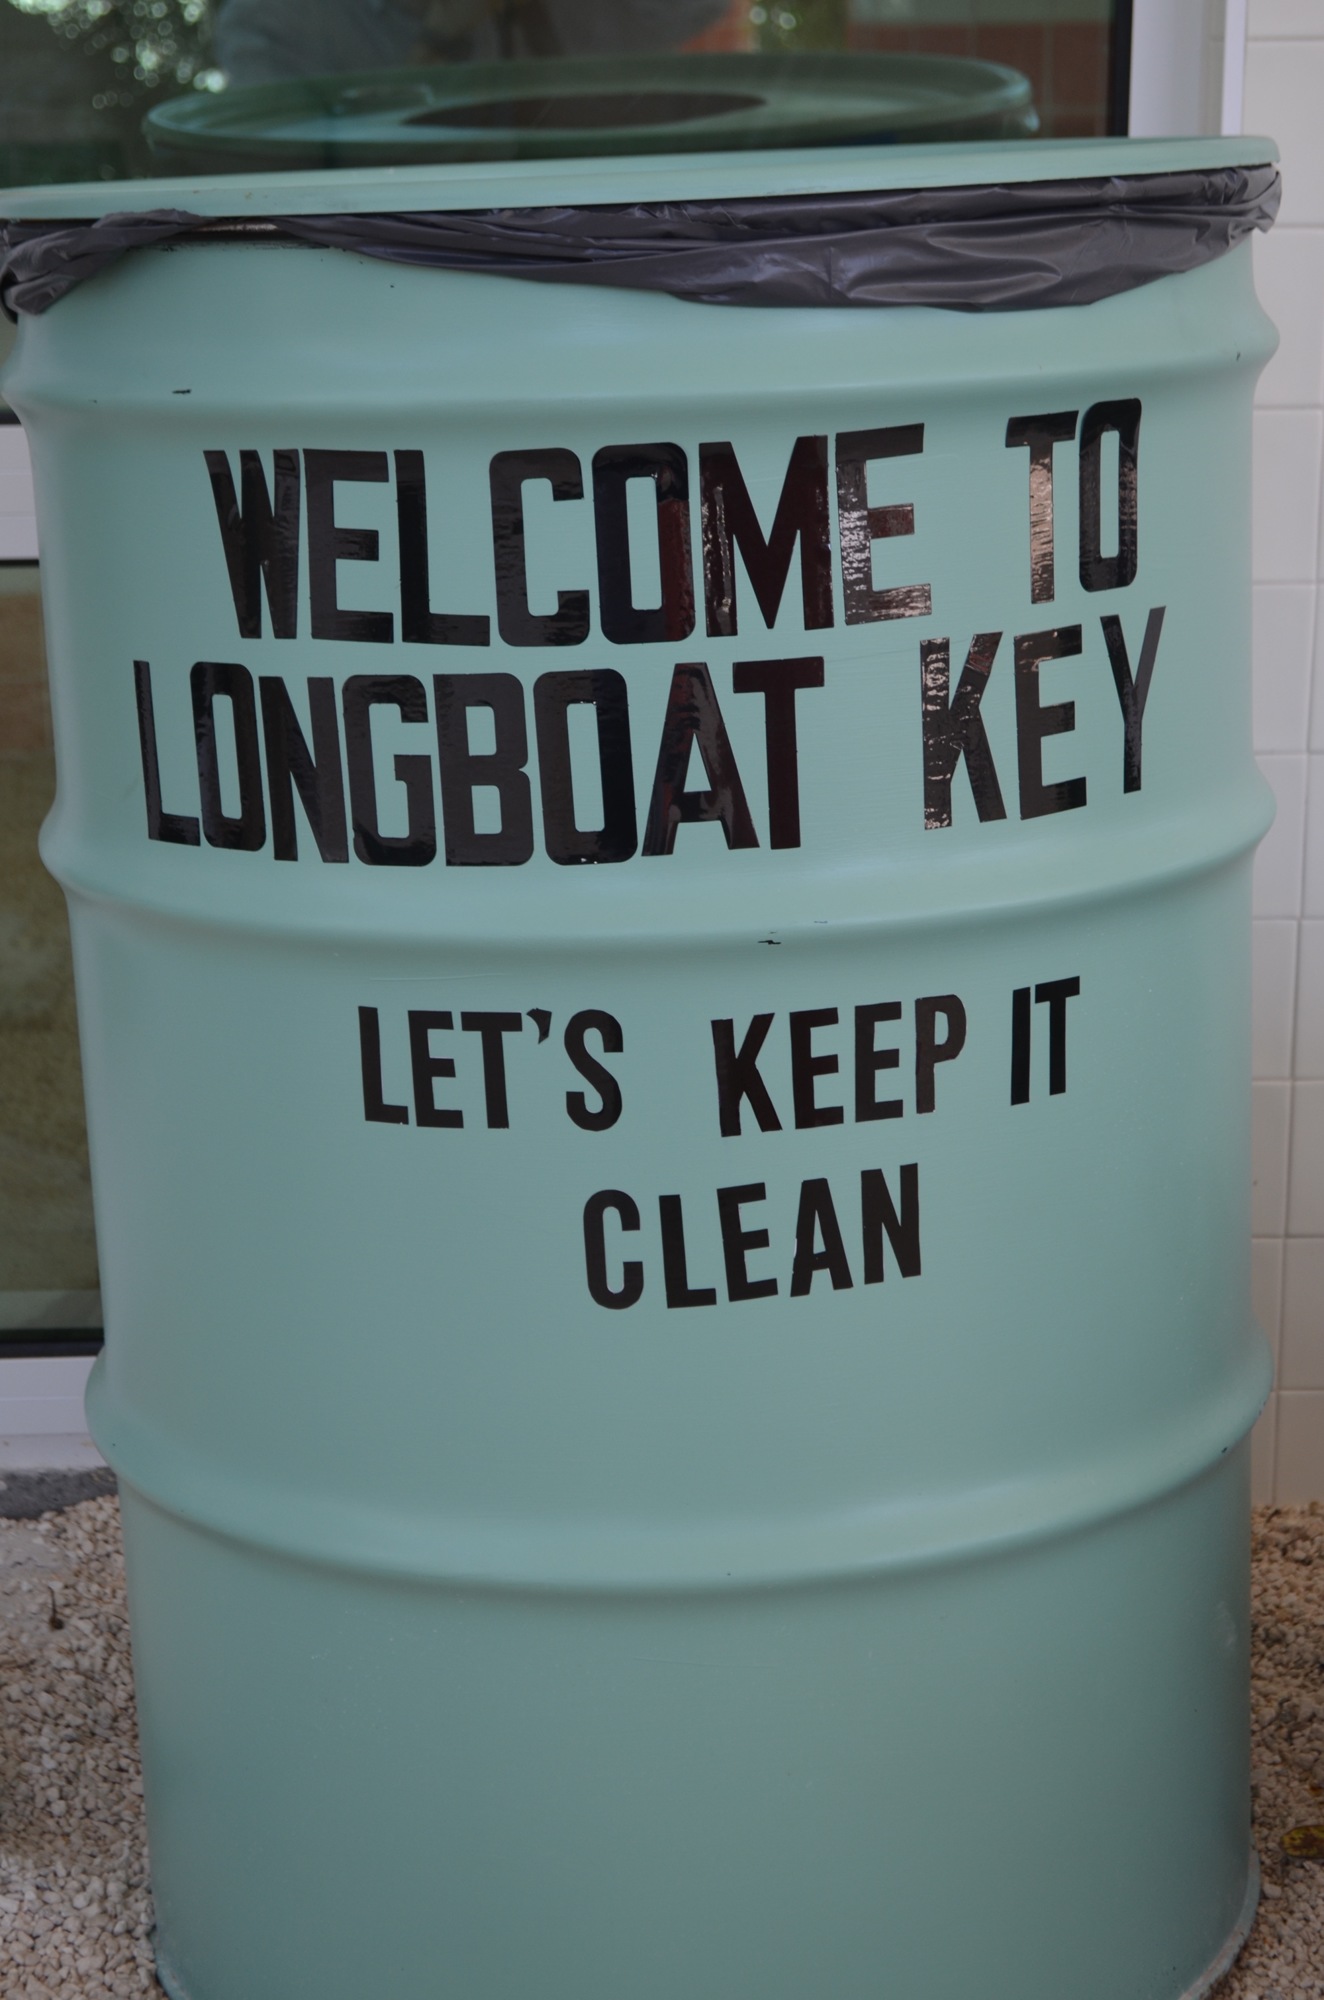 Even the trash cans offer a Longboat Key vibe.